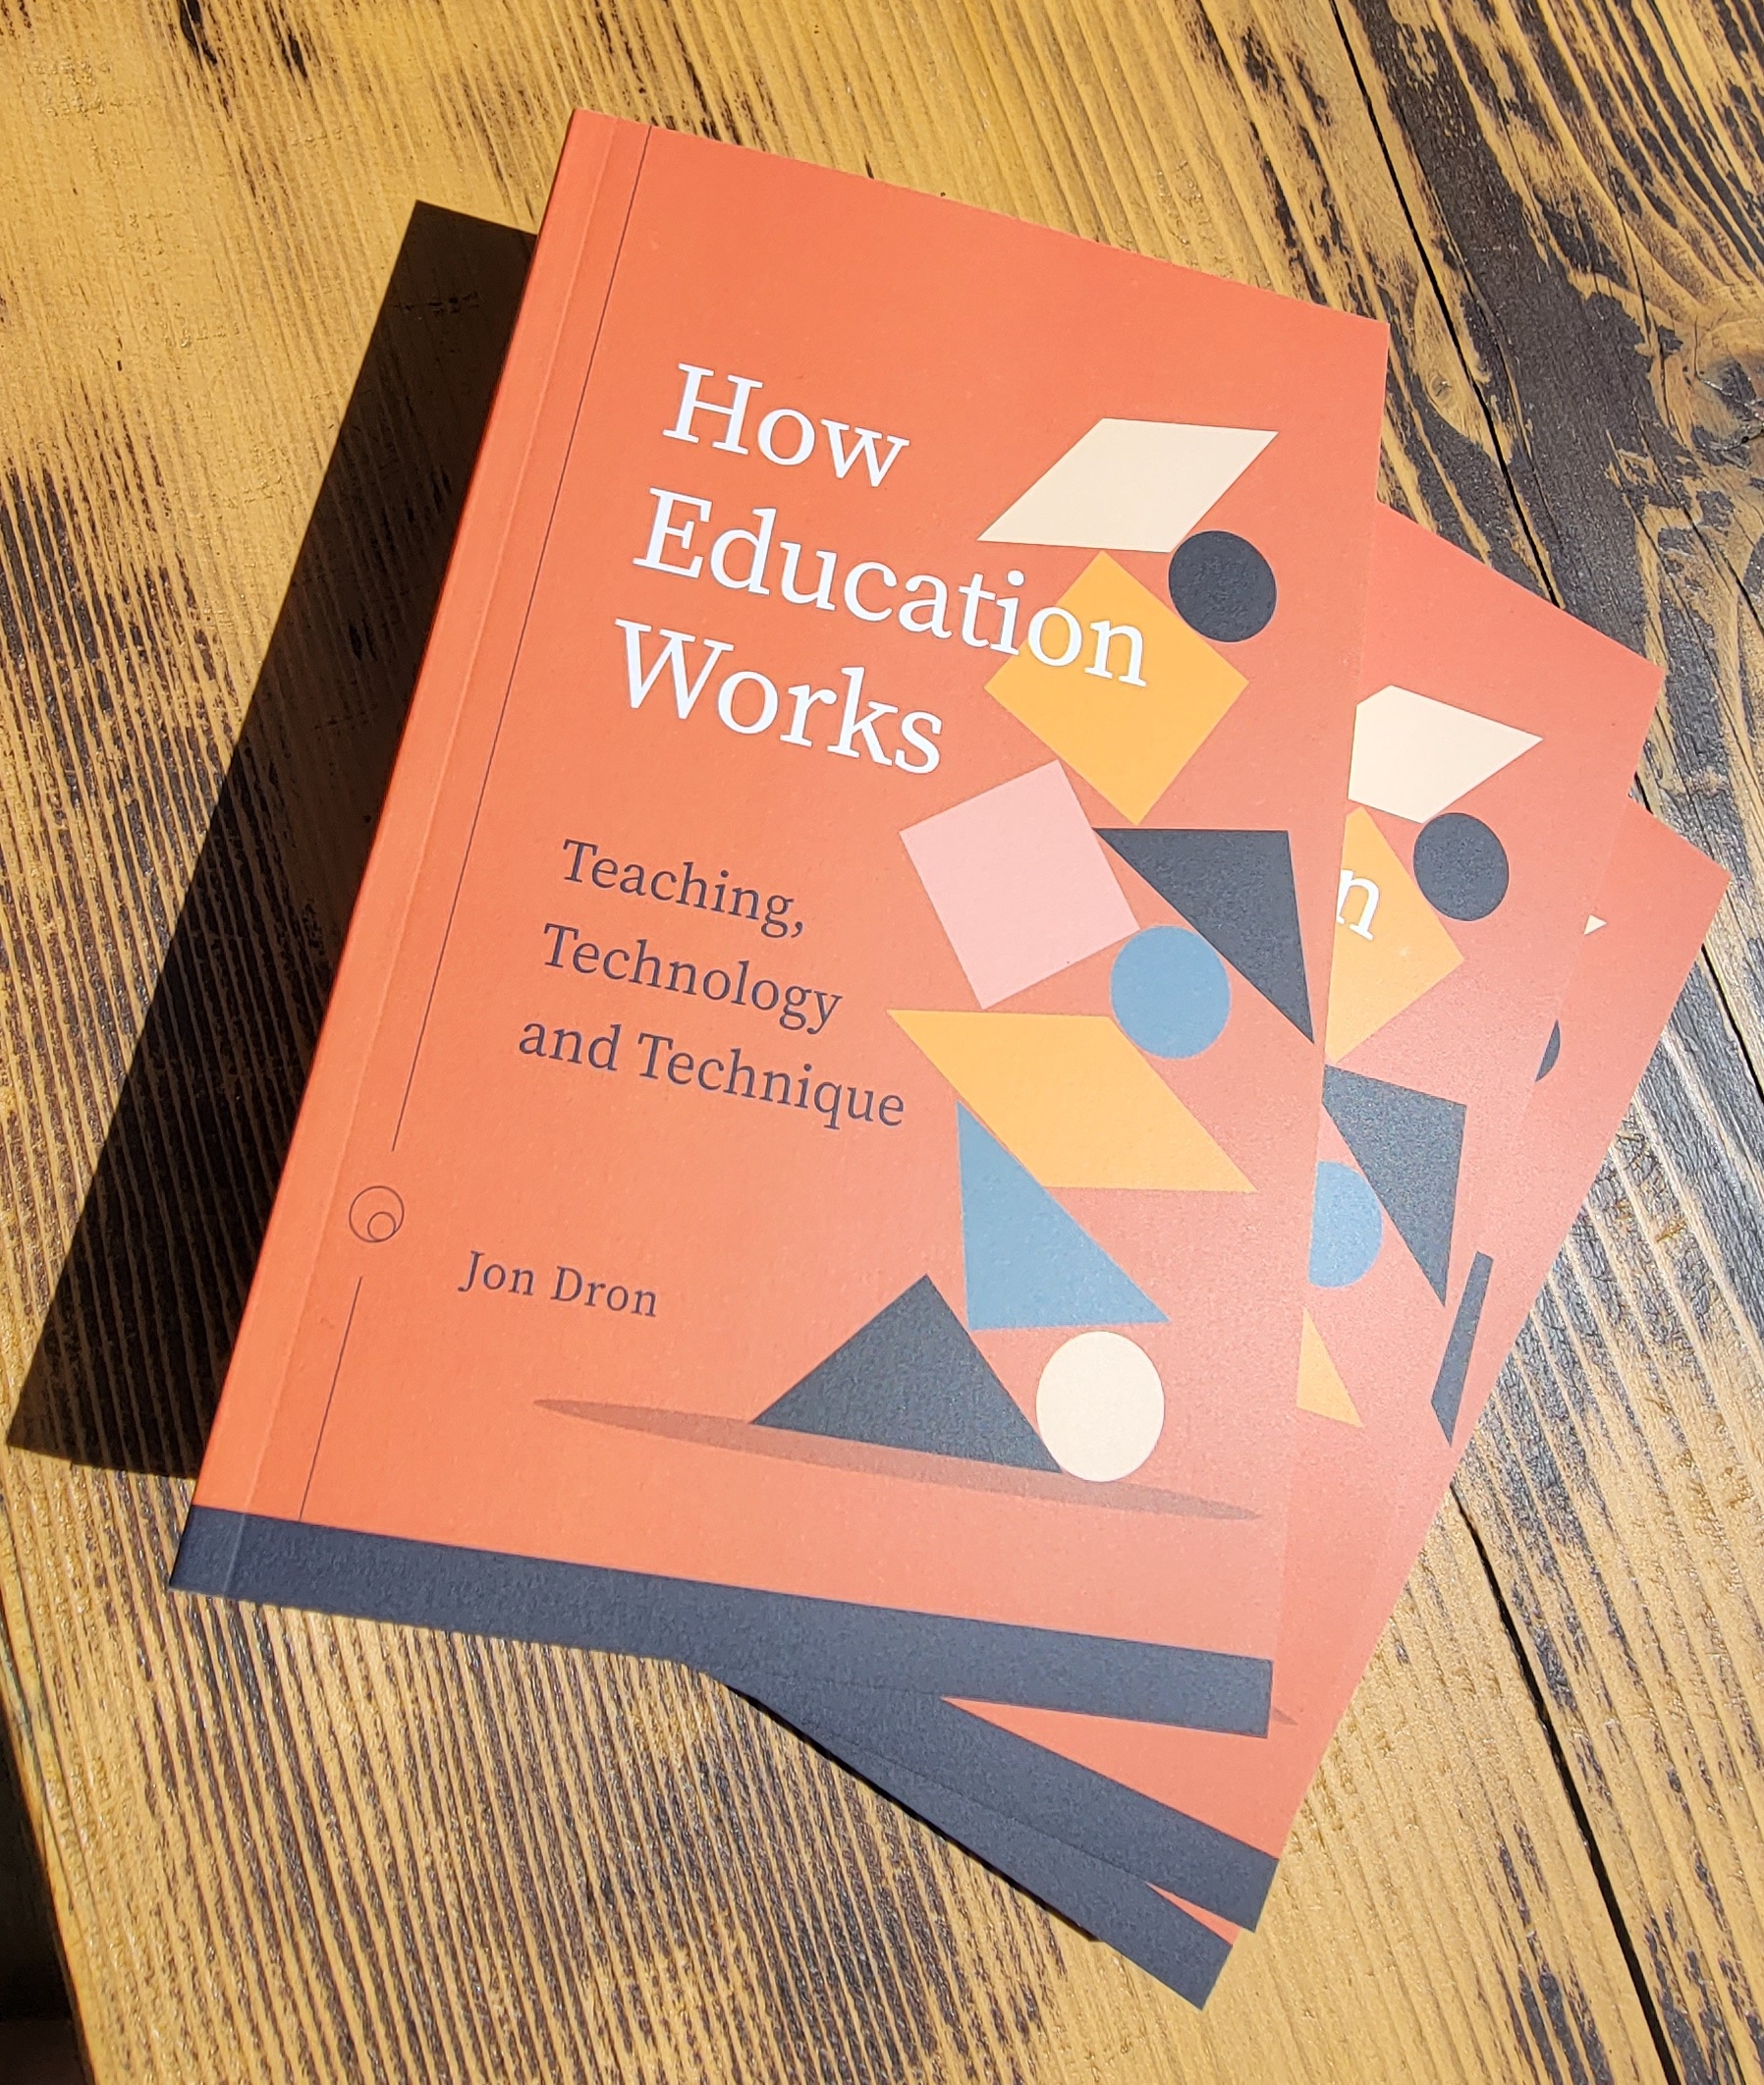 A decade of unwriting: the life history of "How Education Works"